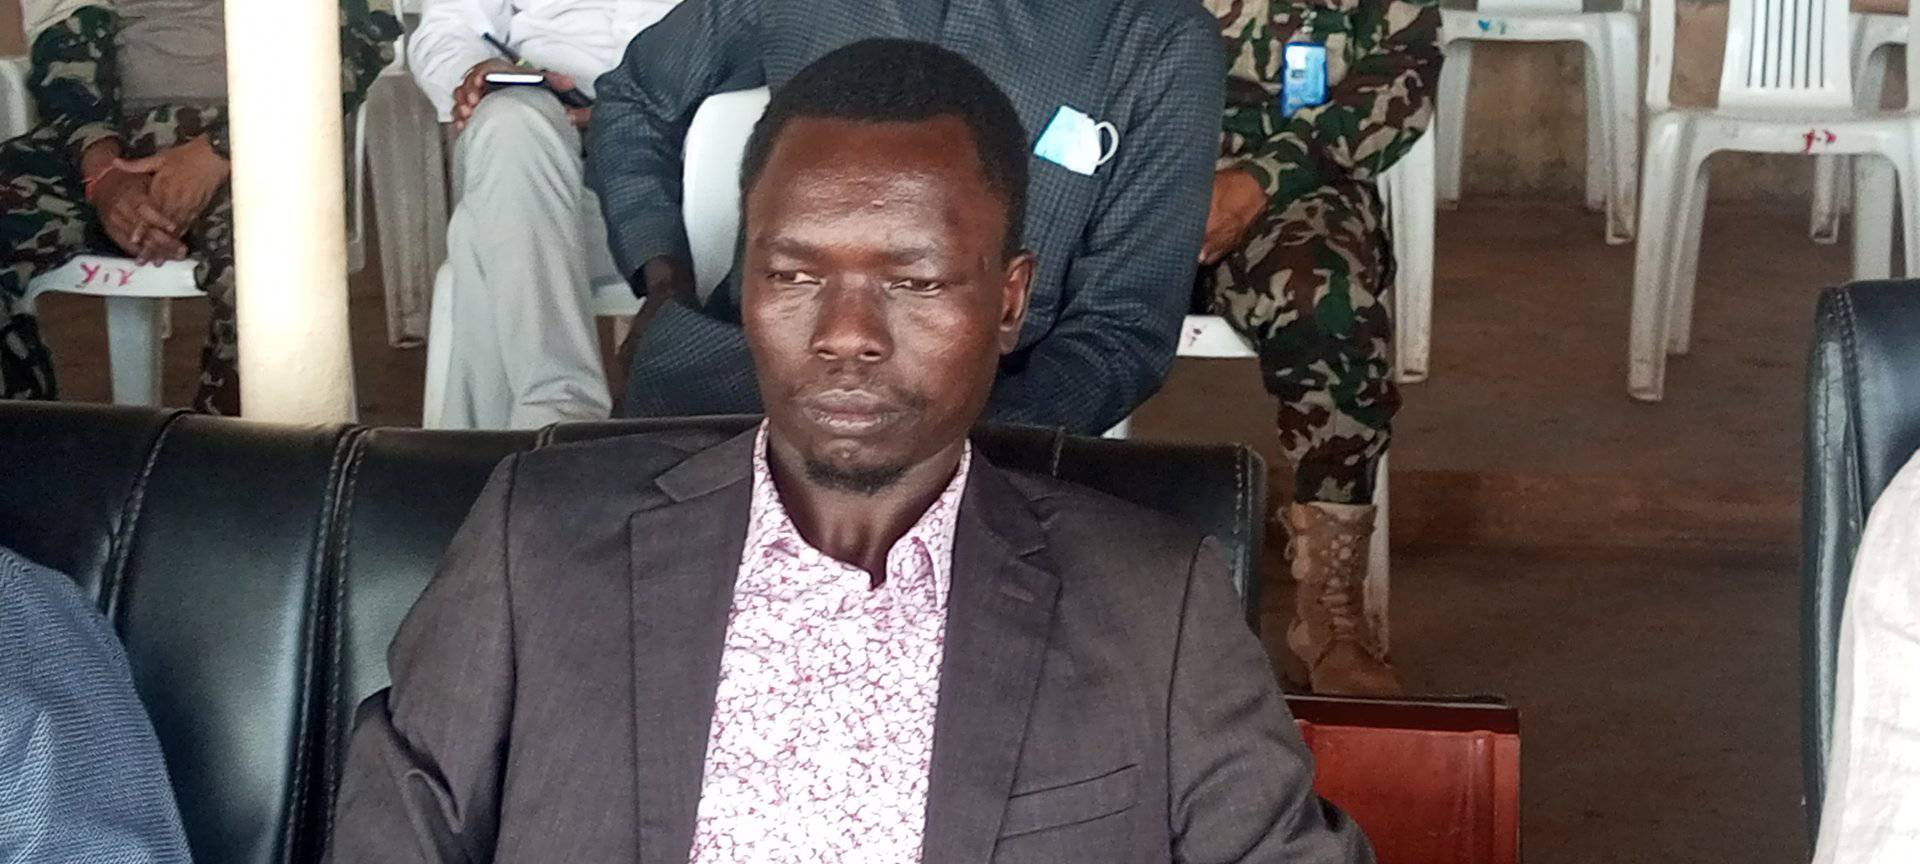 Juba County commissioner summoned over ‘illegal orders’